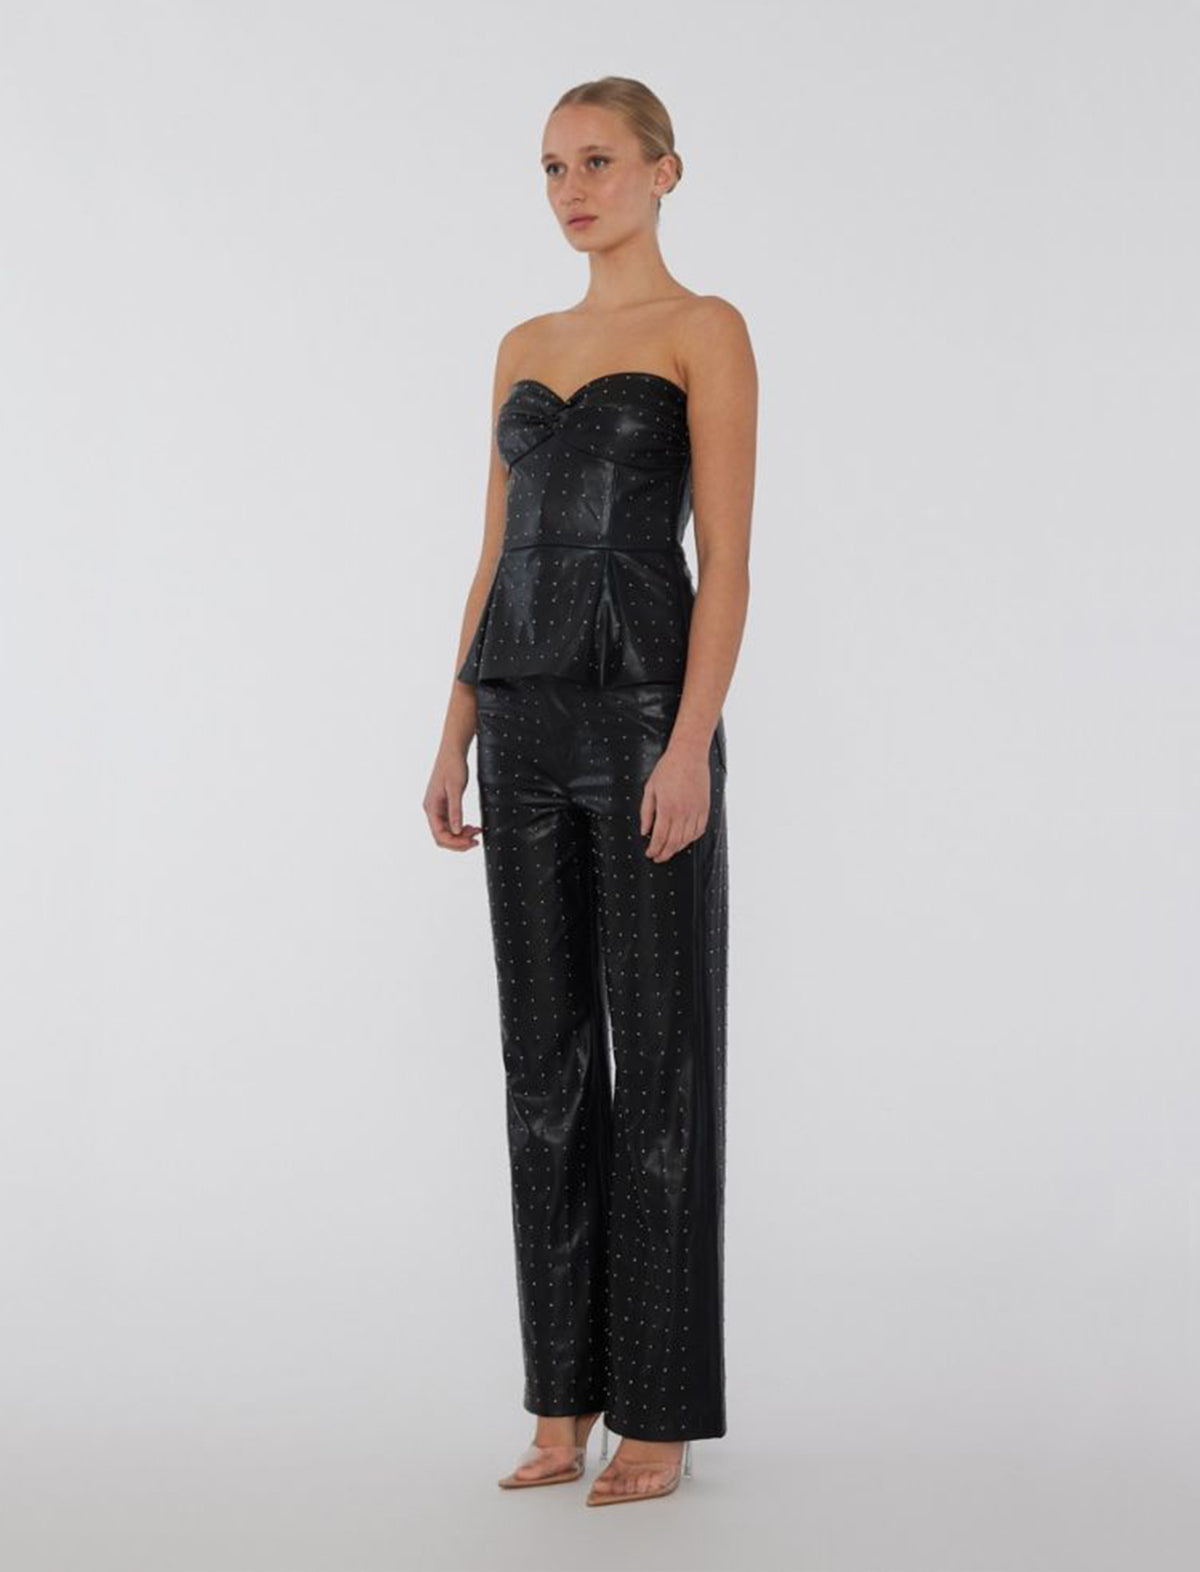 ROTATE Birger Christensen Studded Faux Leather Straight Pants in Black